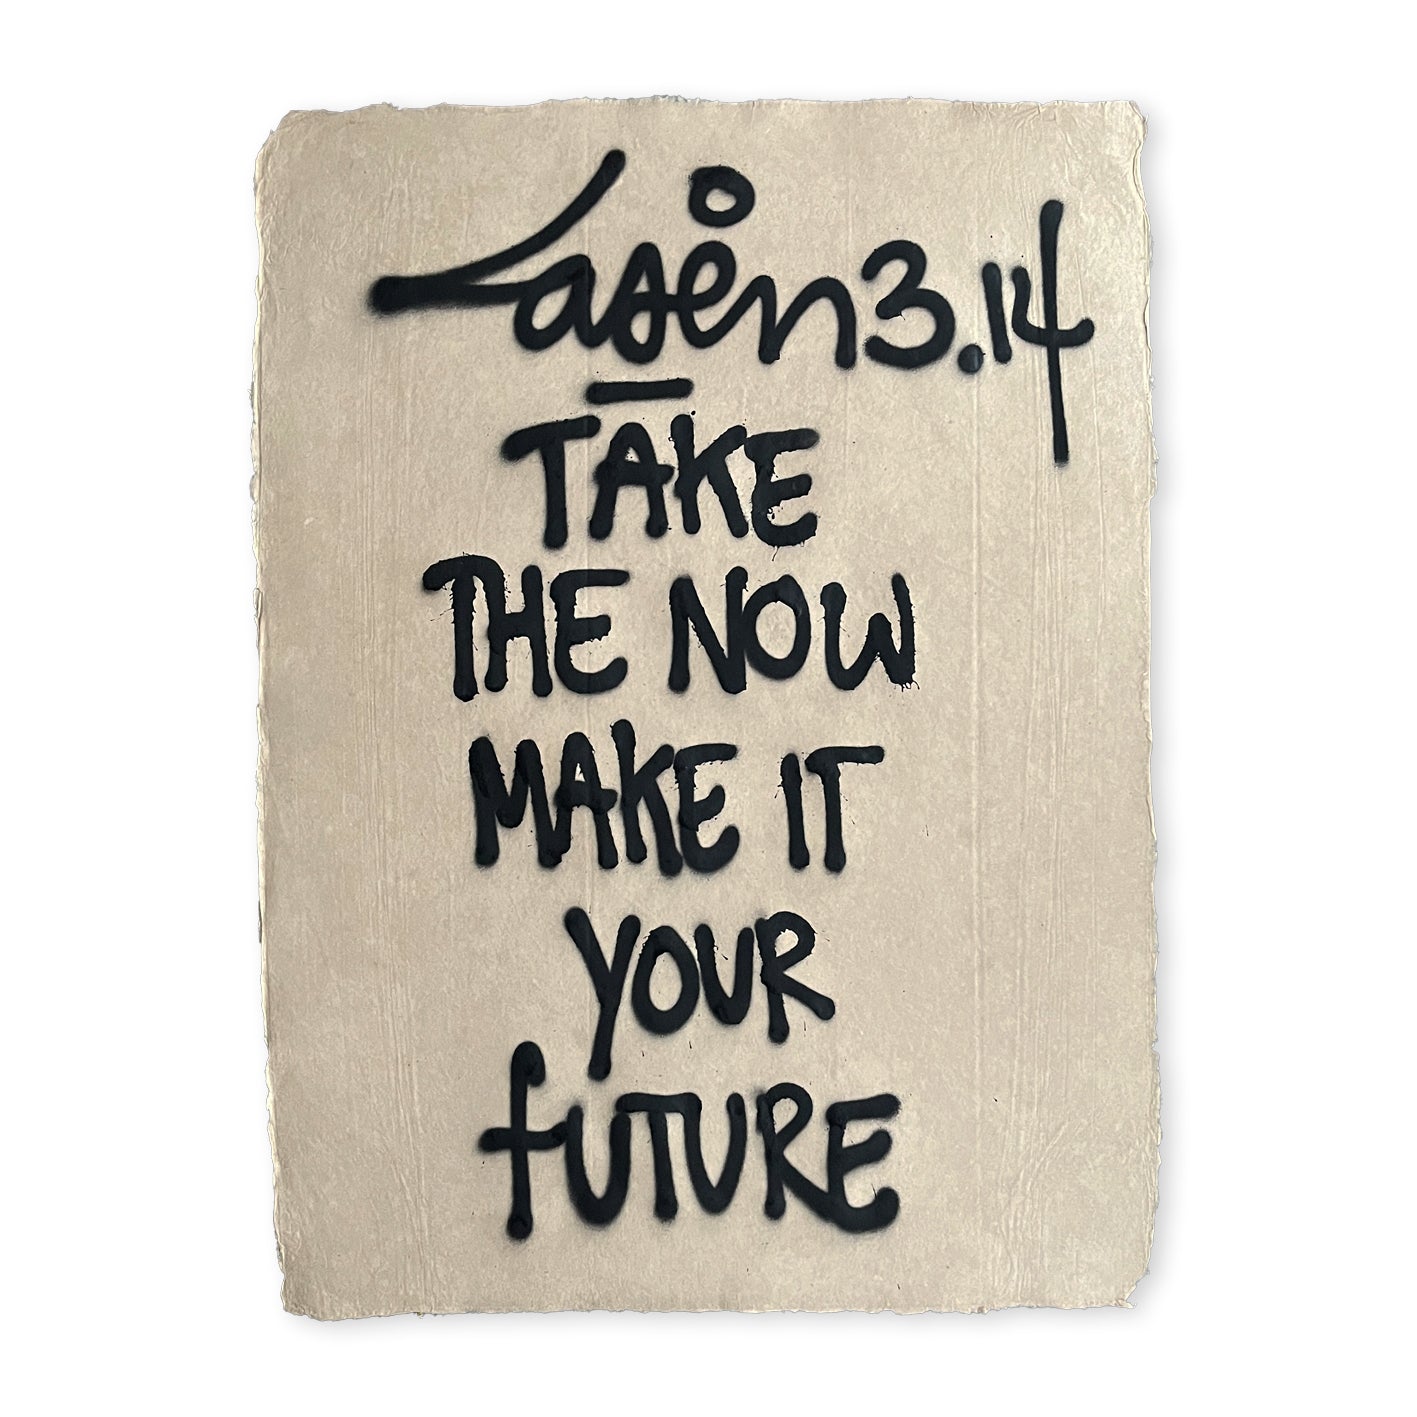 Take The Now Make It Your Future